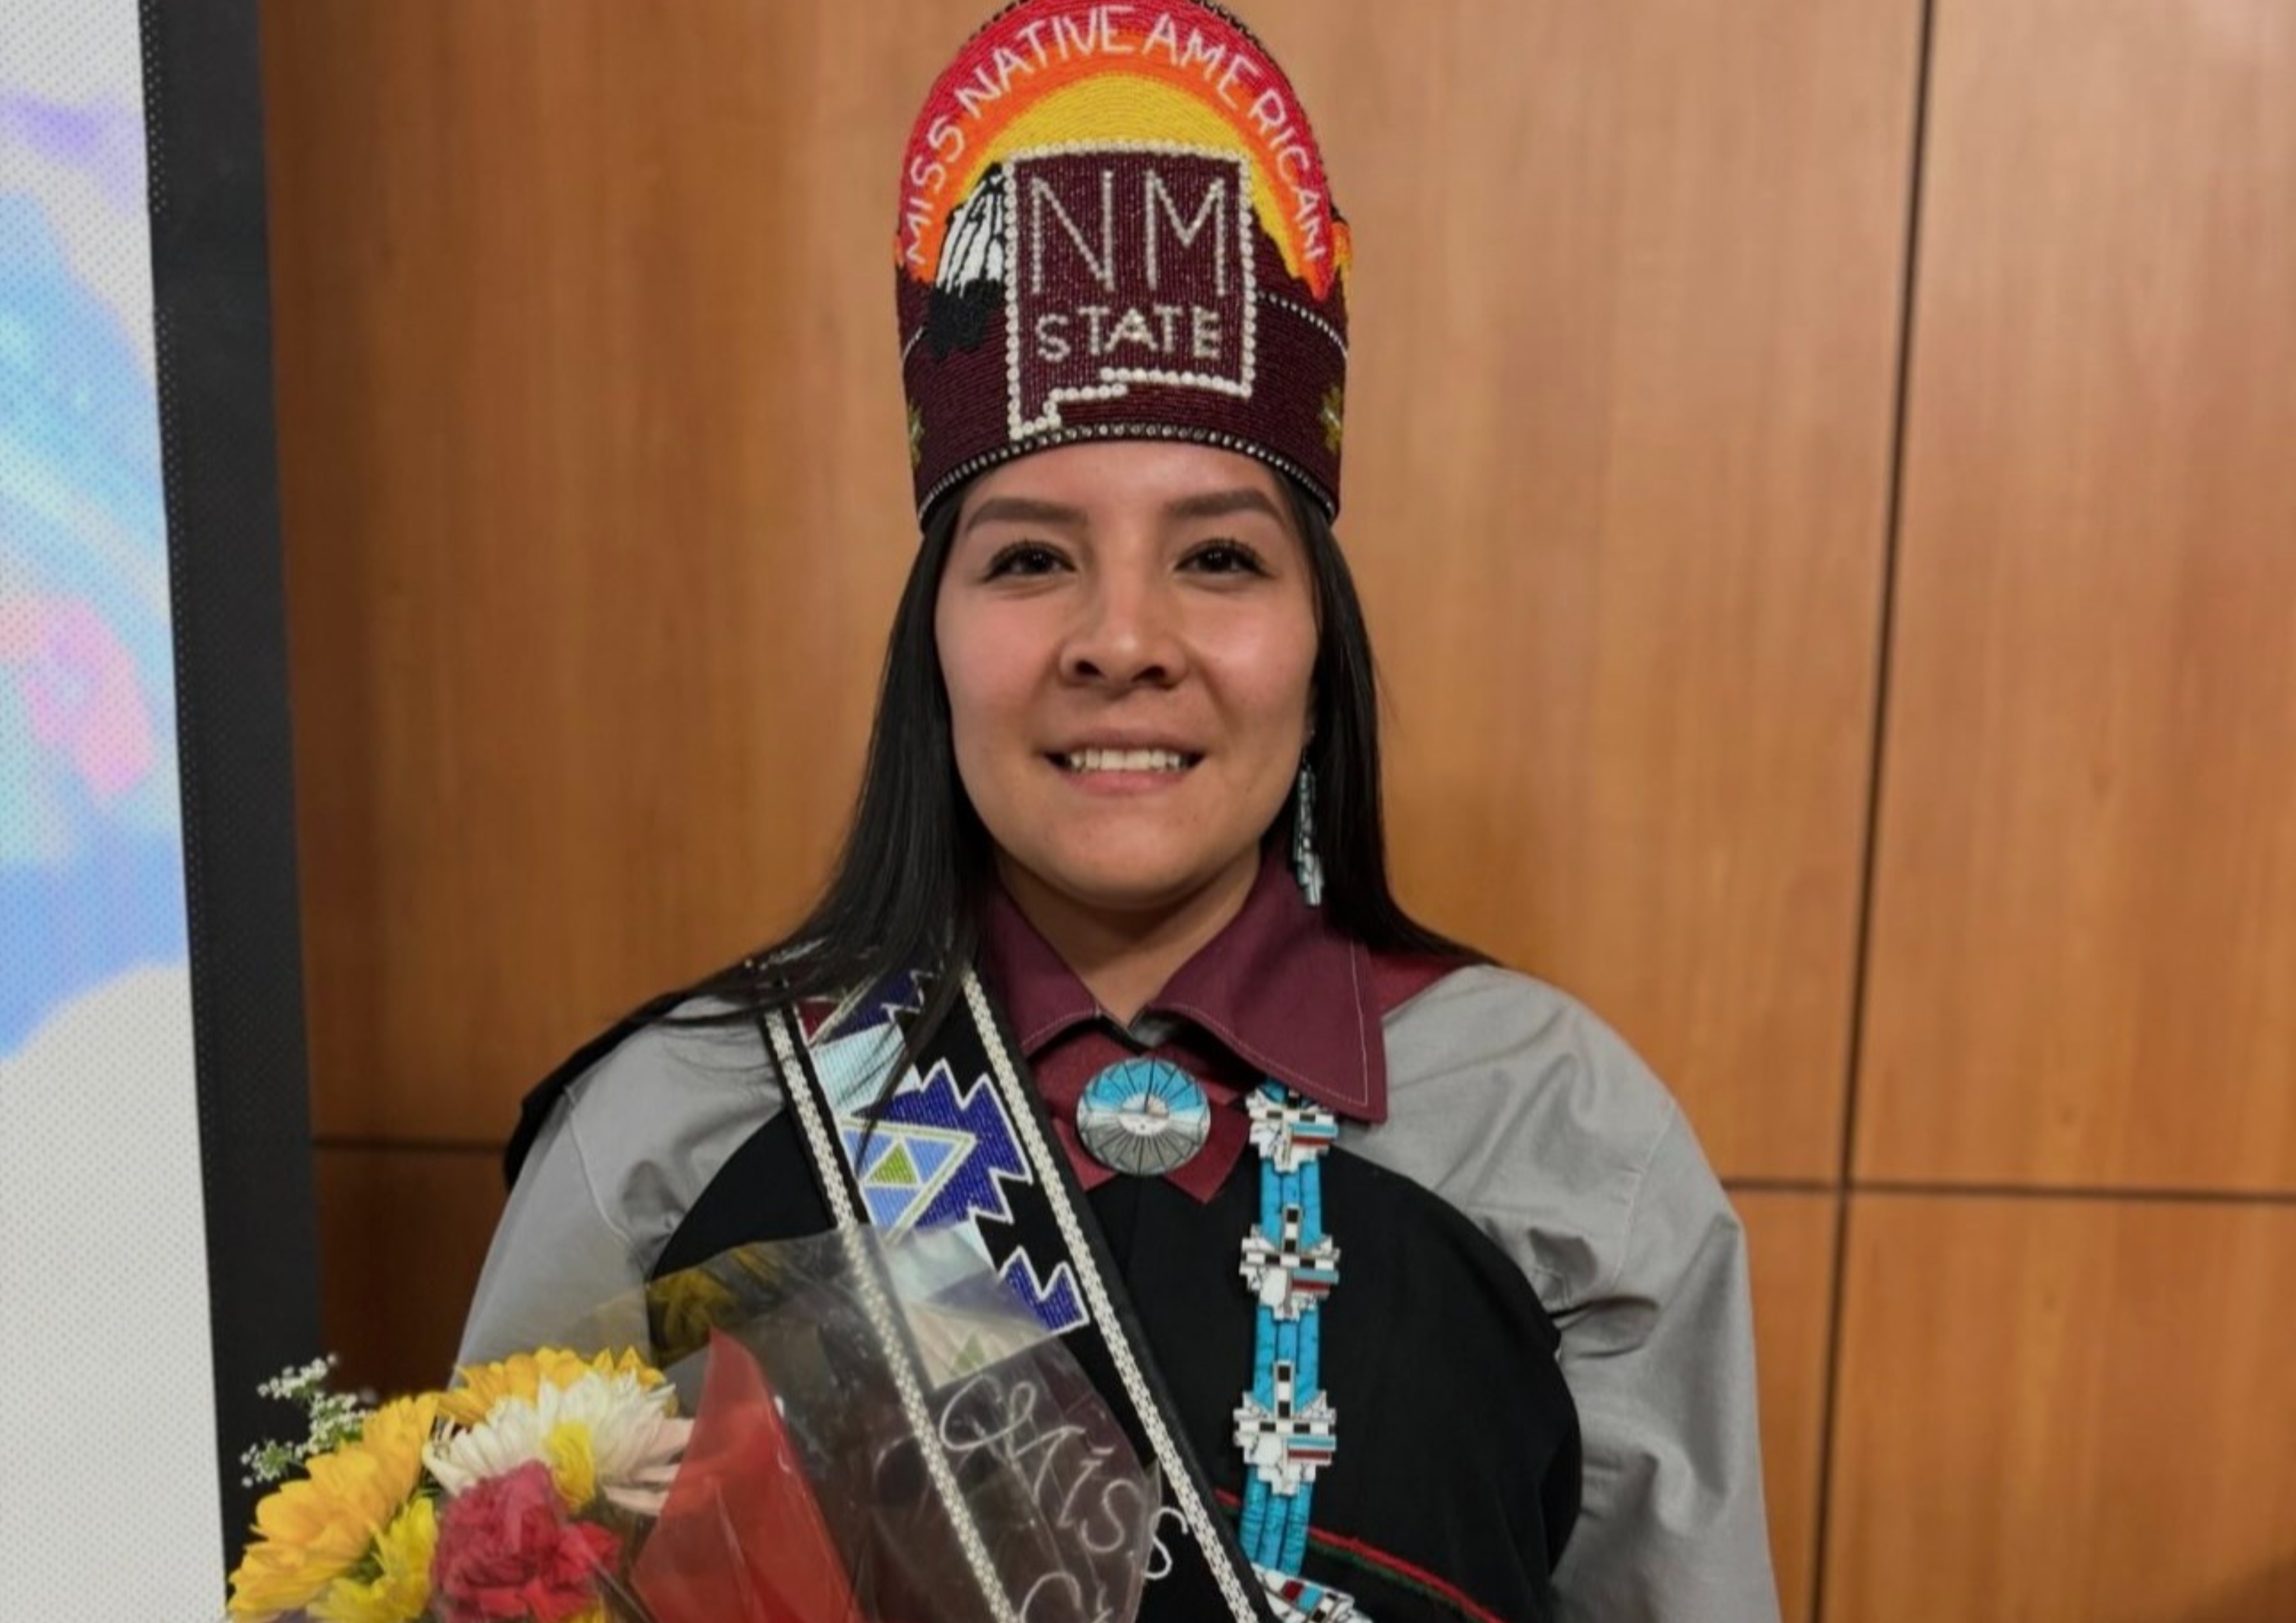 Ms Native American NMSU. Woman wearing traditional regalia, a crown with "MISS NATIVE AMERICAN" and "NM STATE," and holding a bouquet.